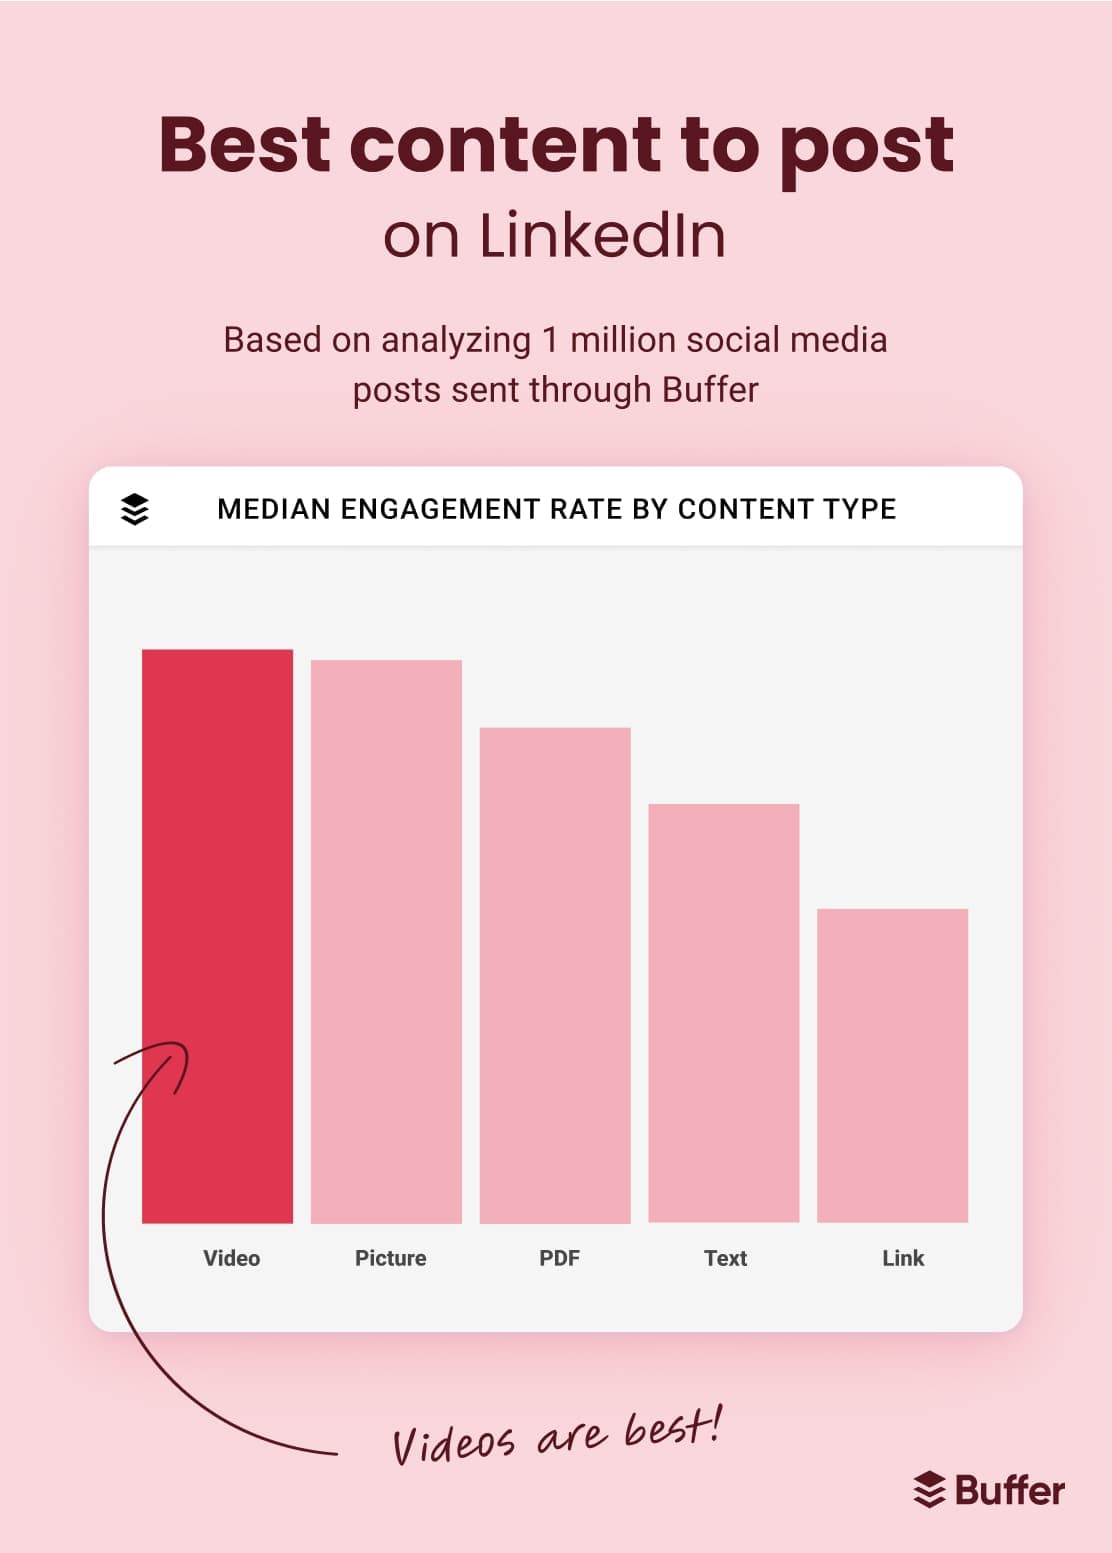 Bar chart comparing median engagement rate by content type displays video as the best content to post on LinkedIn based on analyzing 1 million social media posts sent through Buffer. Video is followed by picture, PDF, text, and link content types.